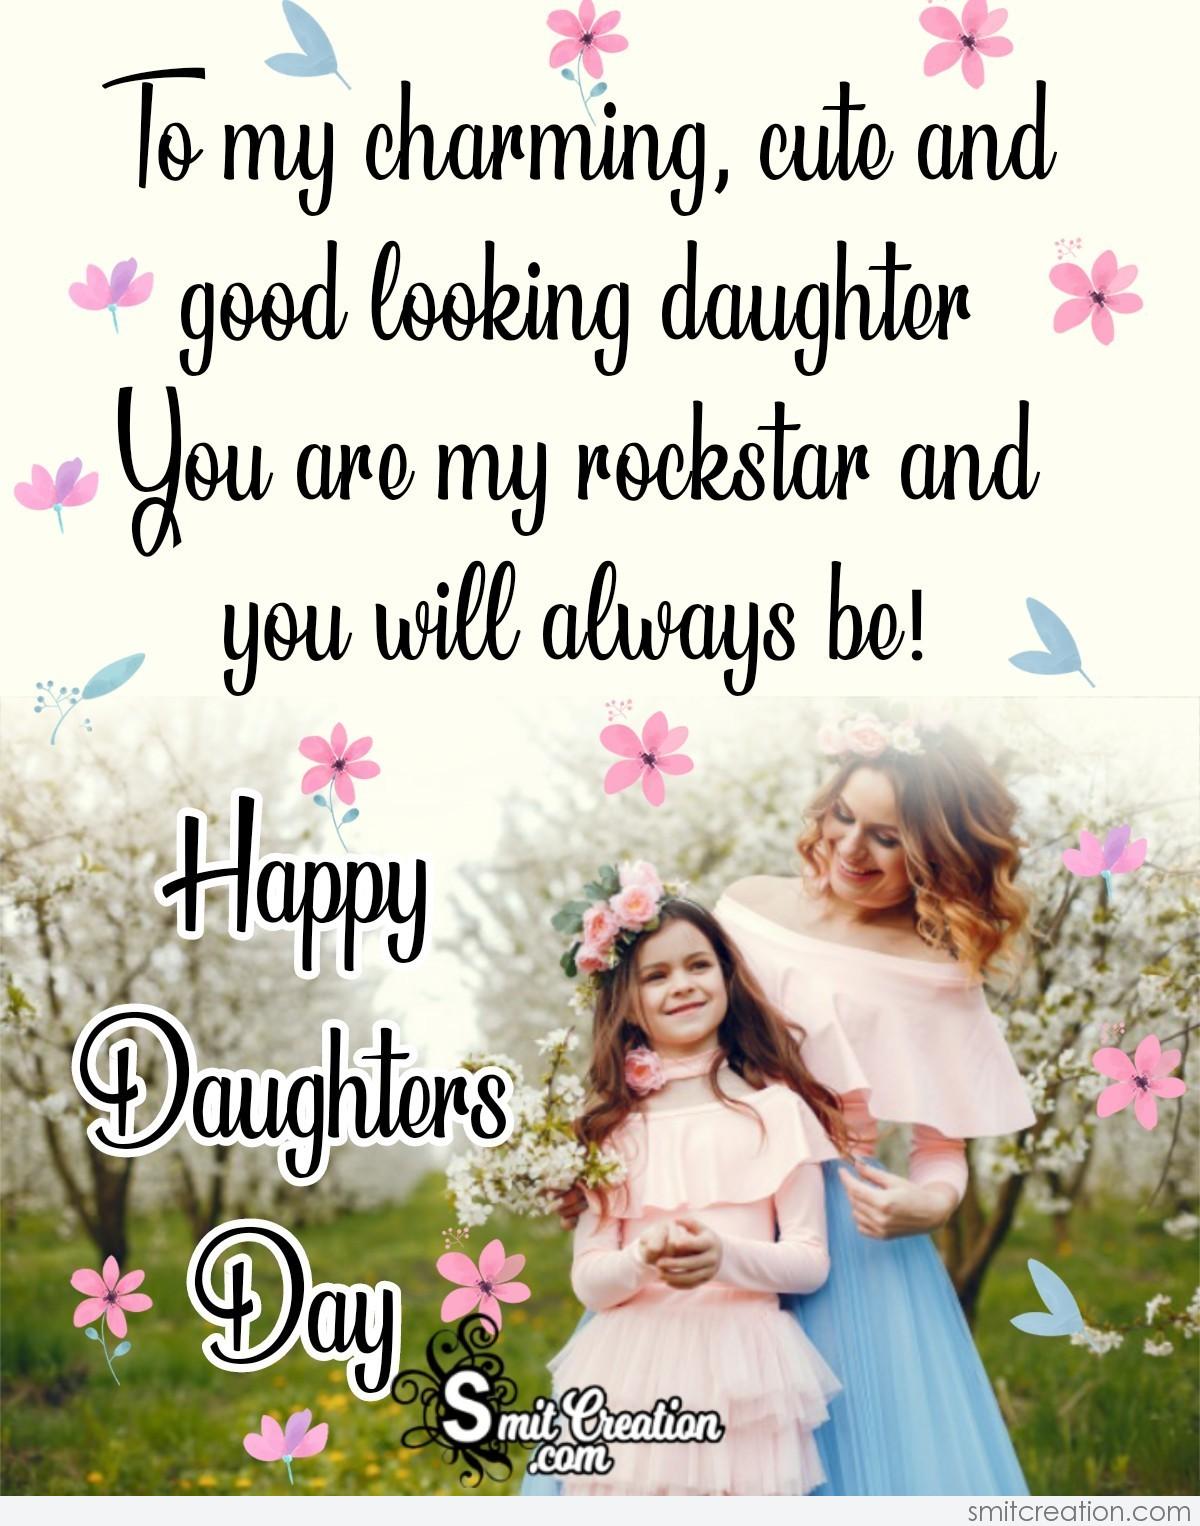 National Daughters Day Image - SmitCreation.com